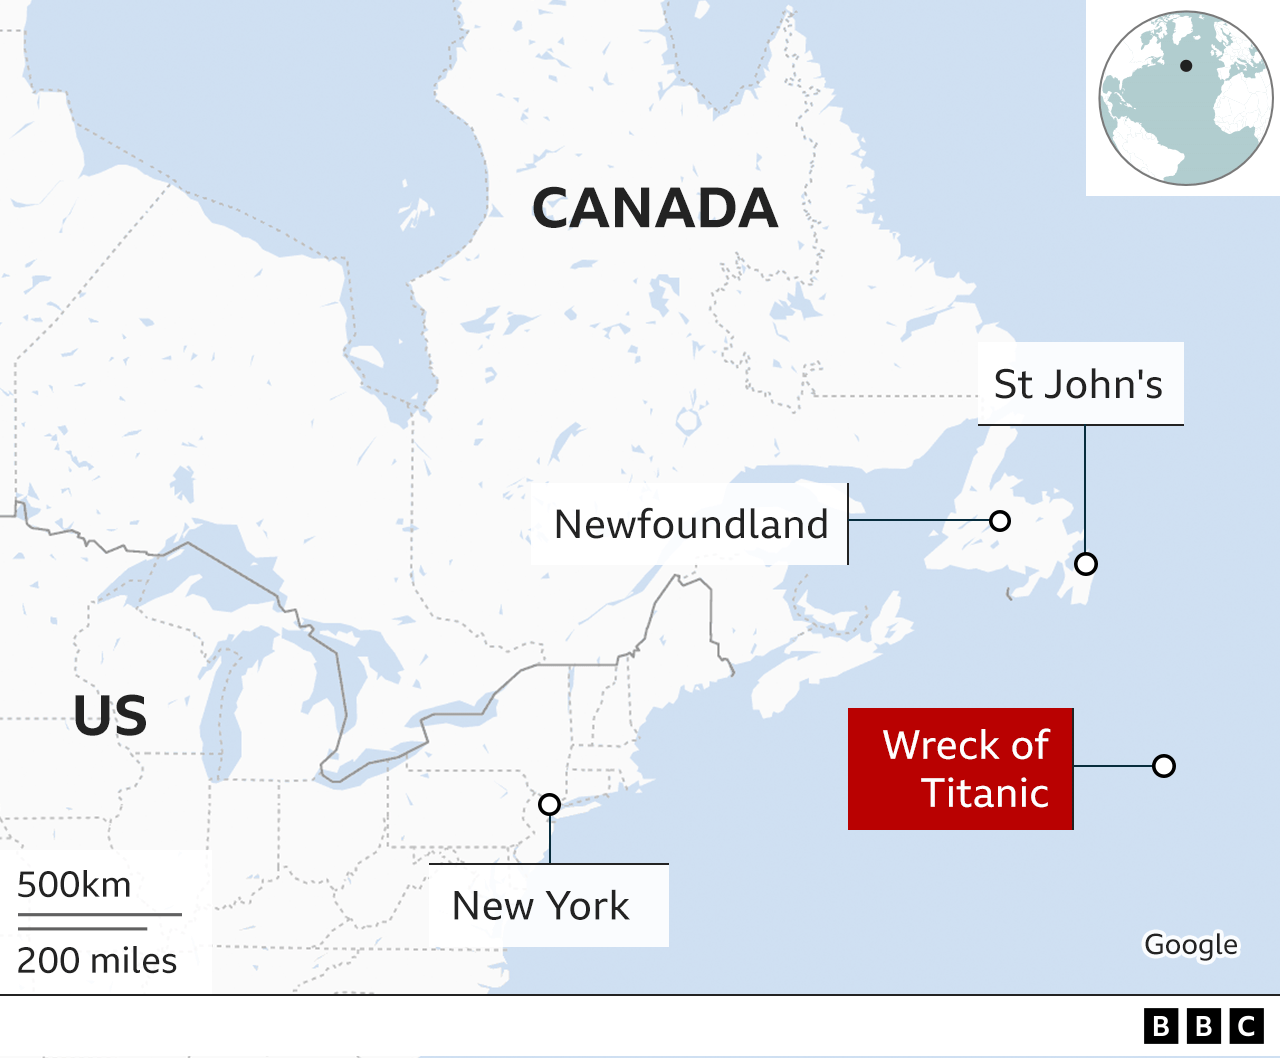 Map shows the location of the Titanic wreck